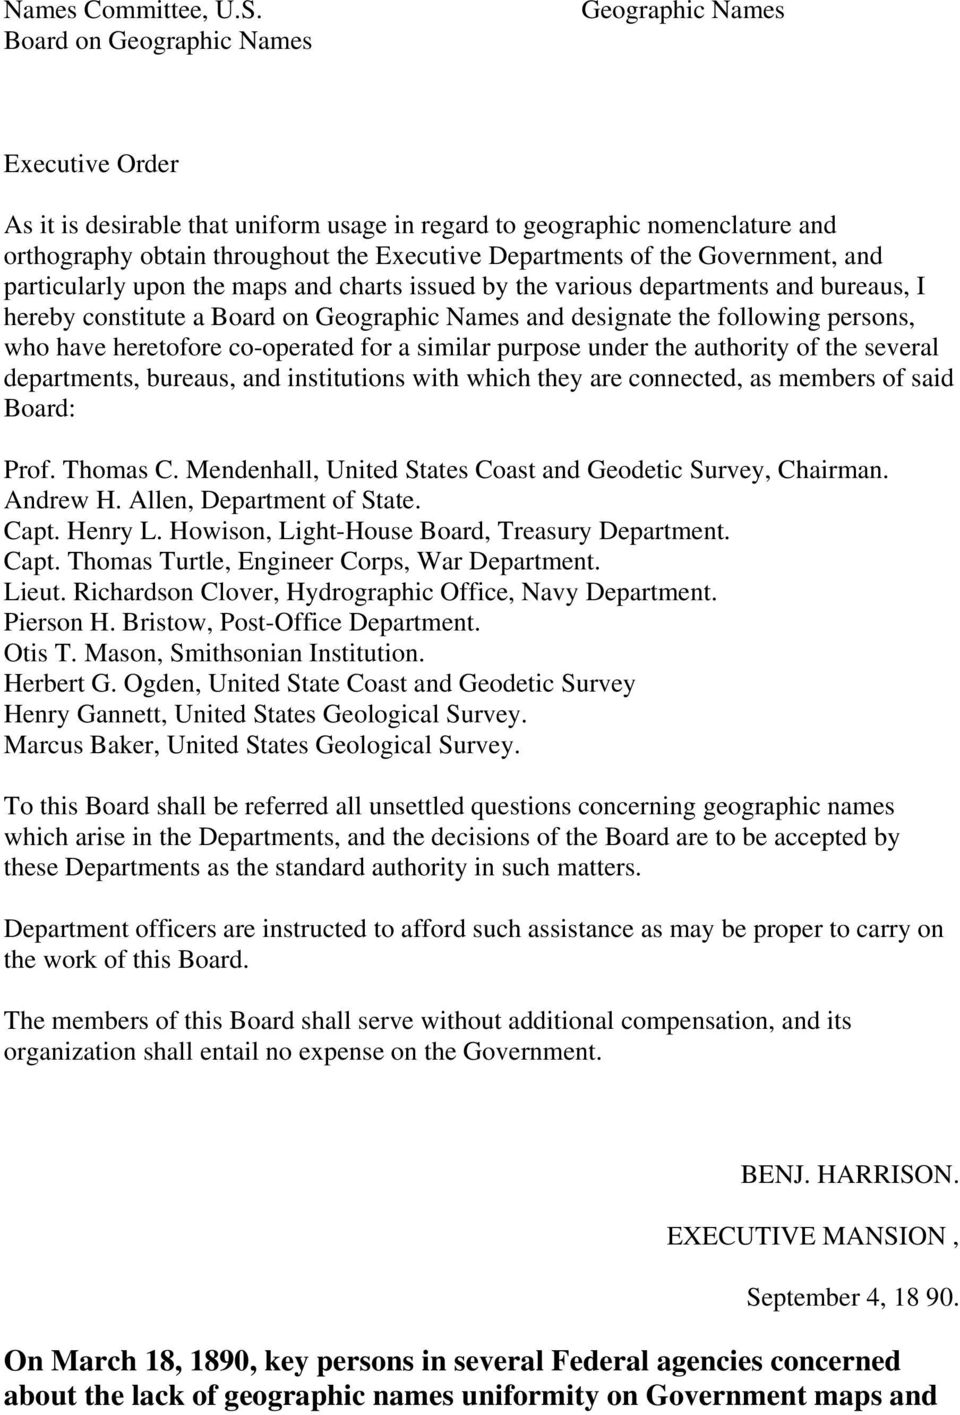 the Government, and particularly upon the maps and charts issued by the various departments and bureaus, I hereby constitute a Board on Geographic Names and designate the following persons, who have